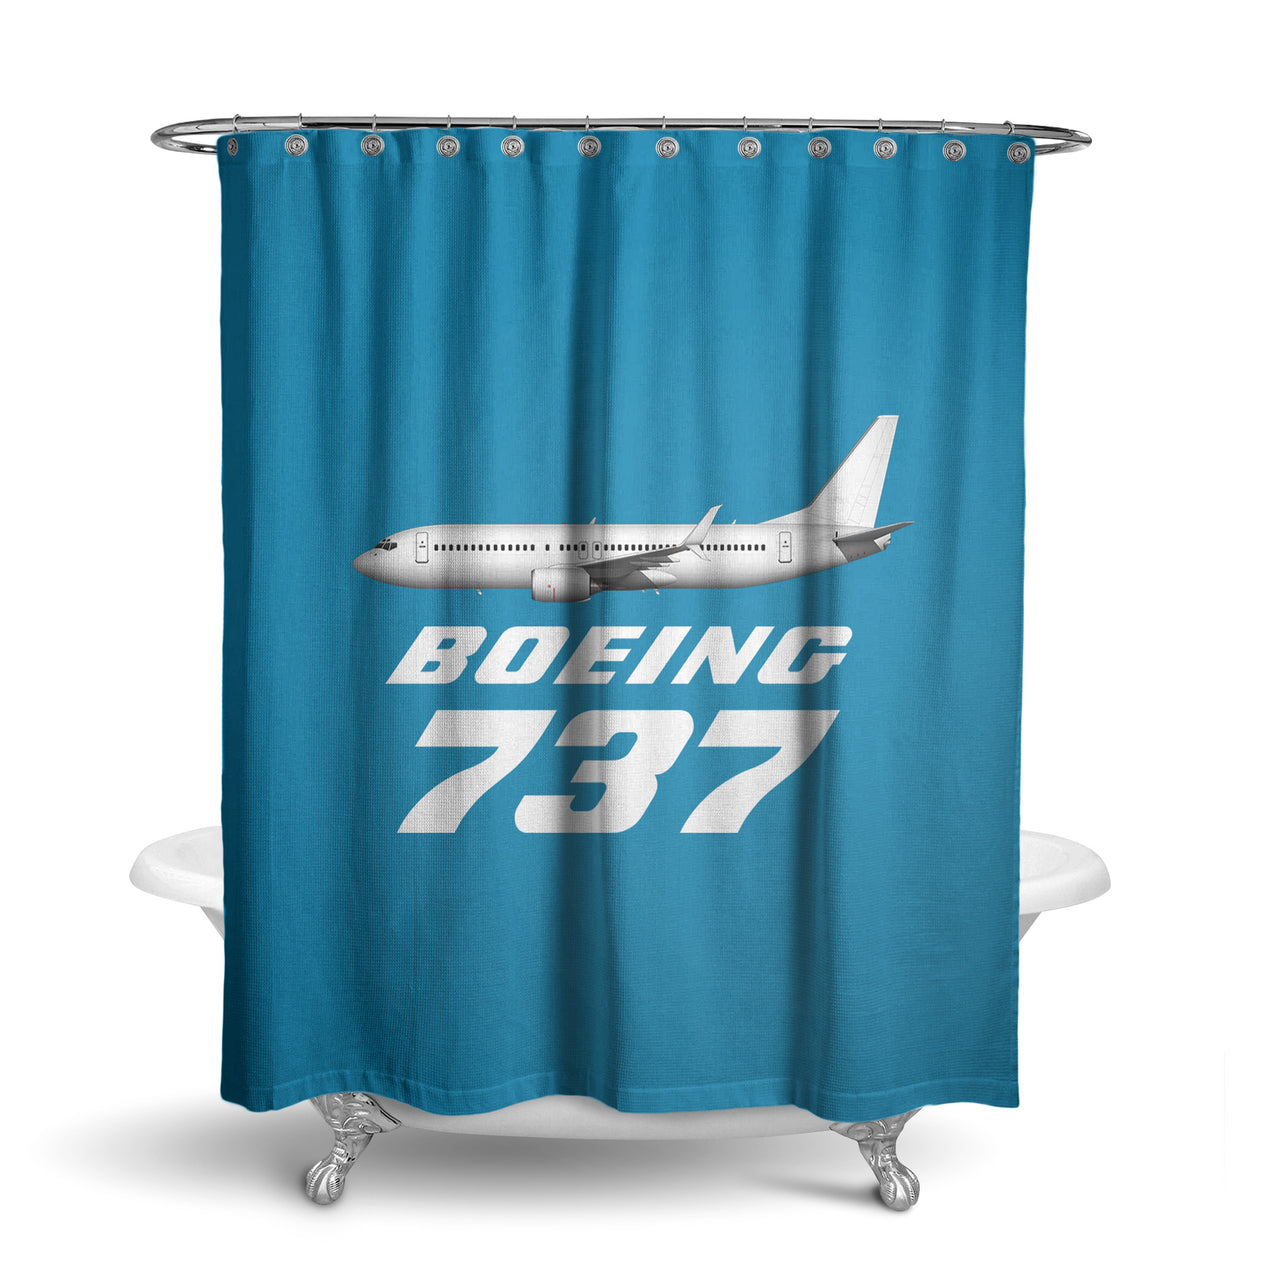 The Boeing 737 Designed Shower Curtains